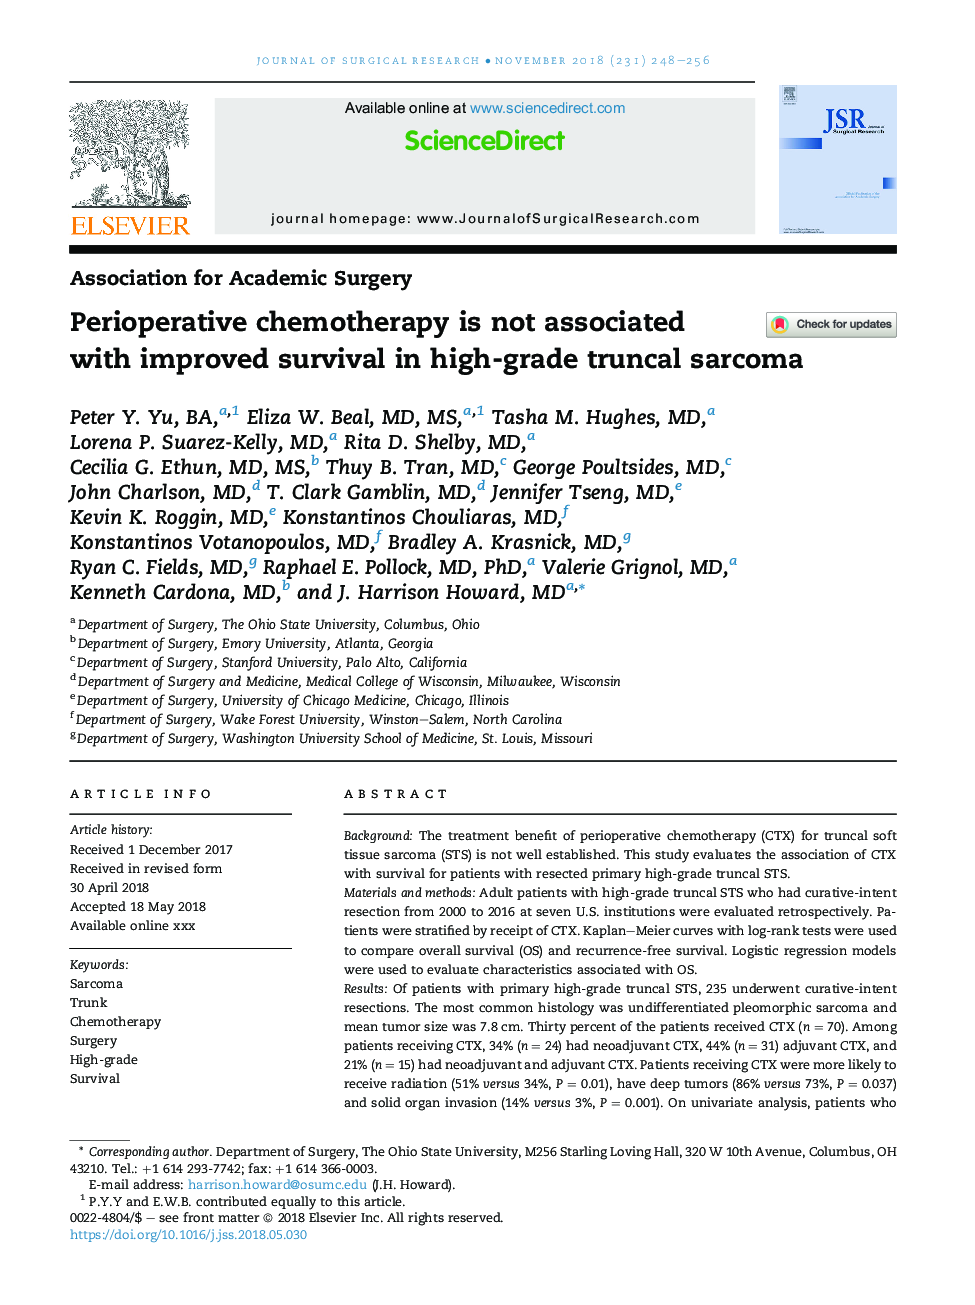 Perioperative chemotherapy is not associated with improved survival in high-grade truncal sarcoma